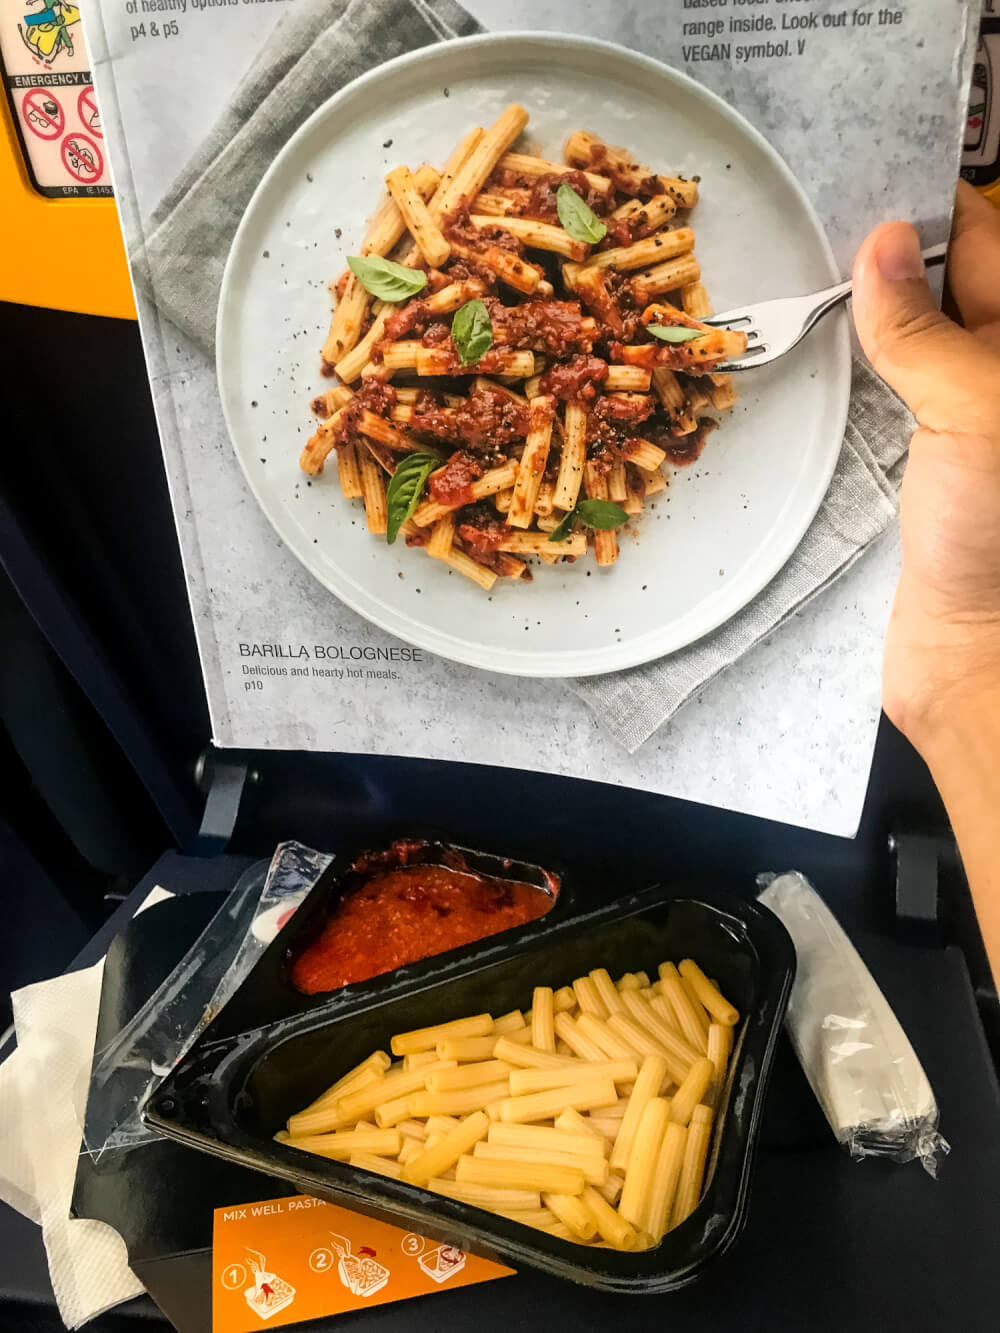 Ryanair in flight pasta compared to the photo from the cover of the menu